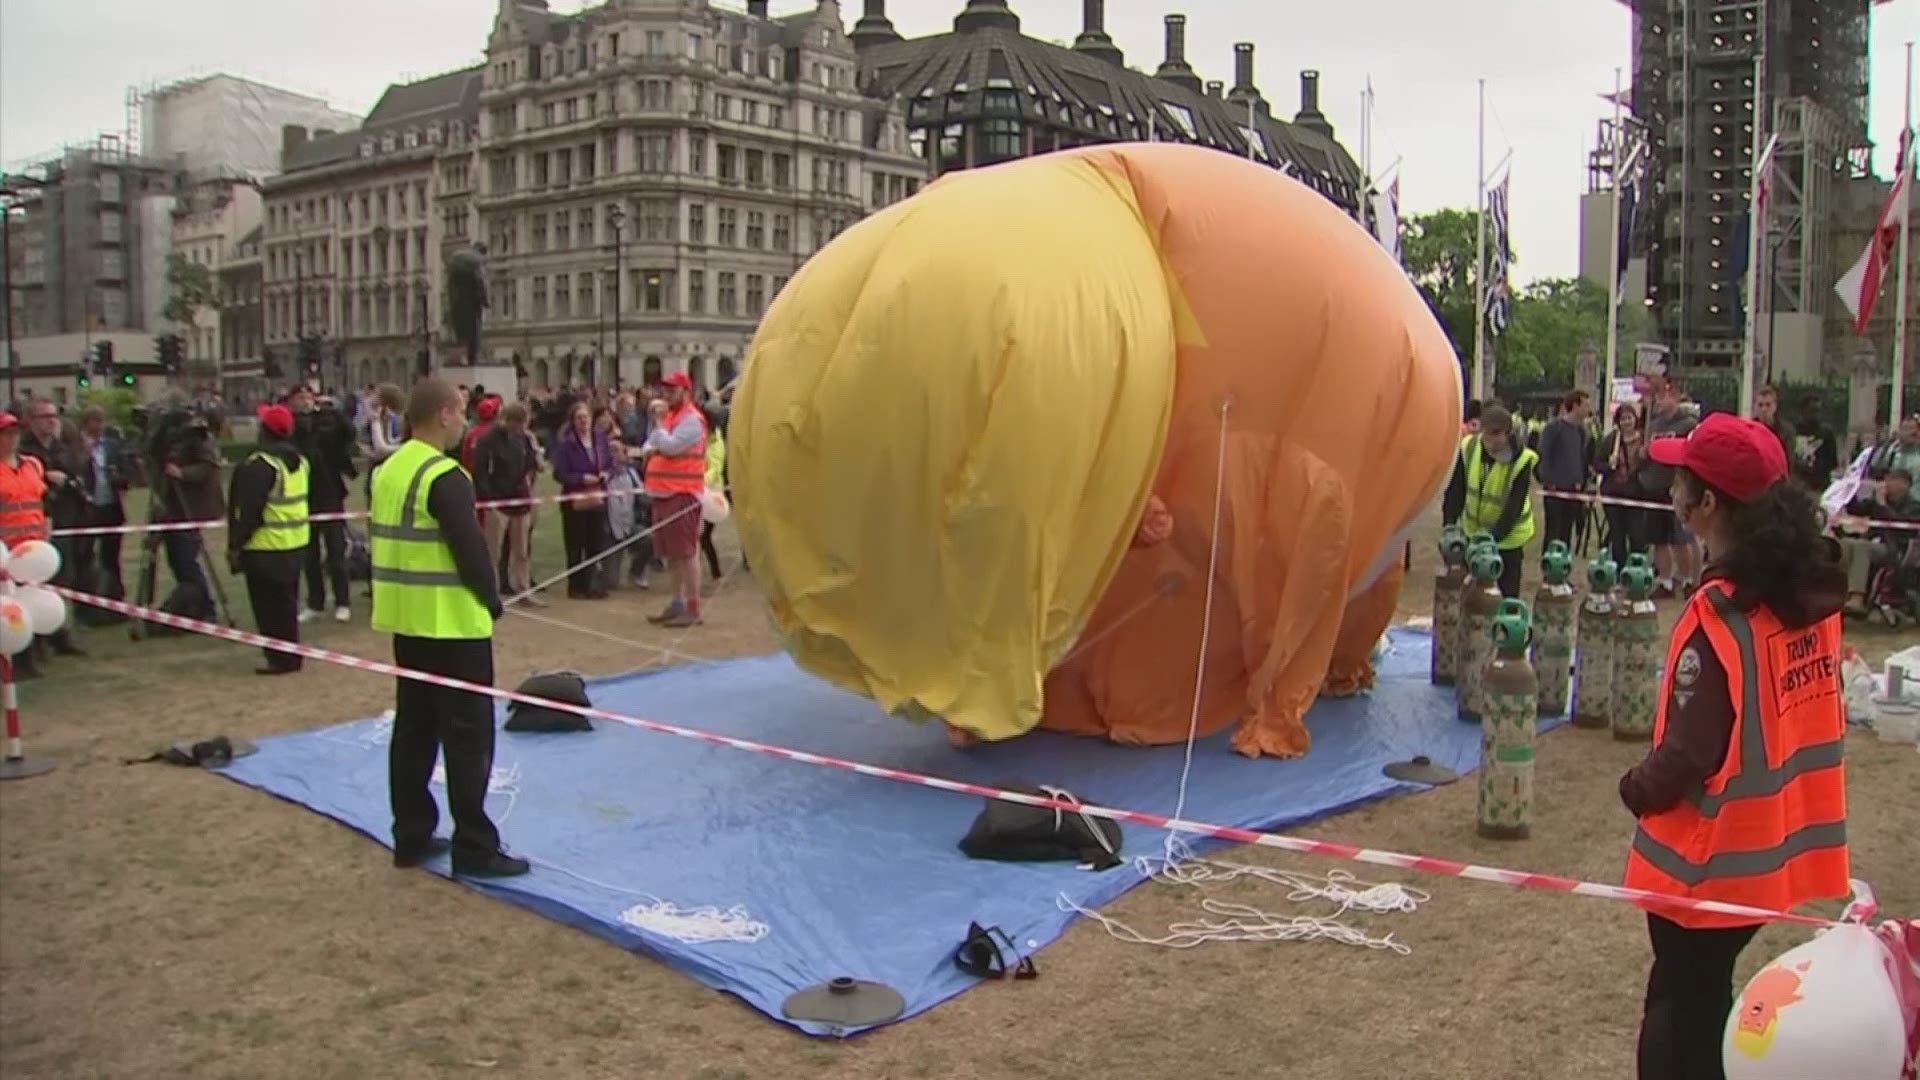 The 'Trump Baby' blimp is inflated in central London as people start to gather to demonstrate against the state visit of President Donald Trump. (AP)